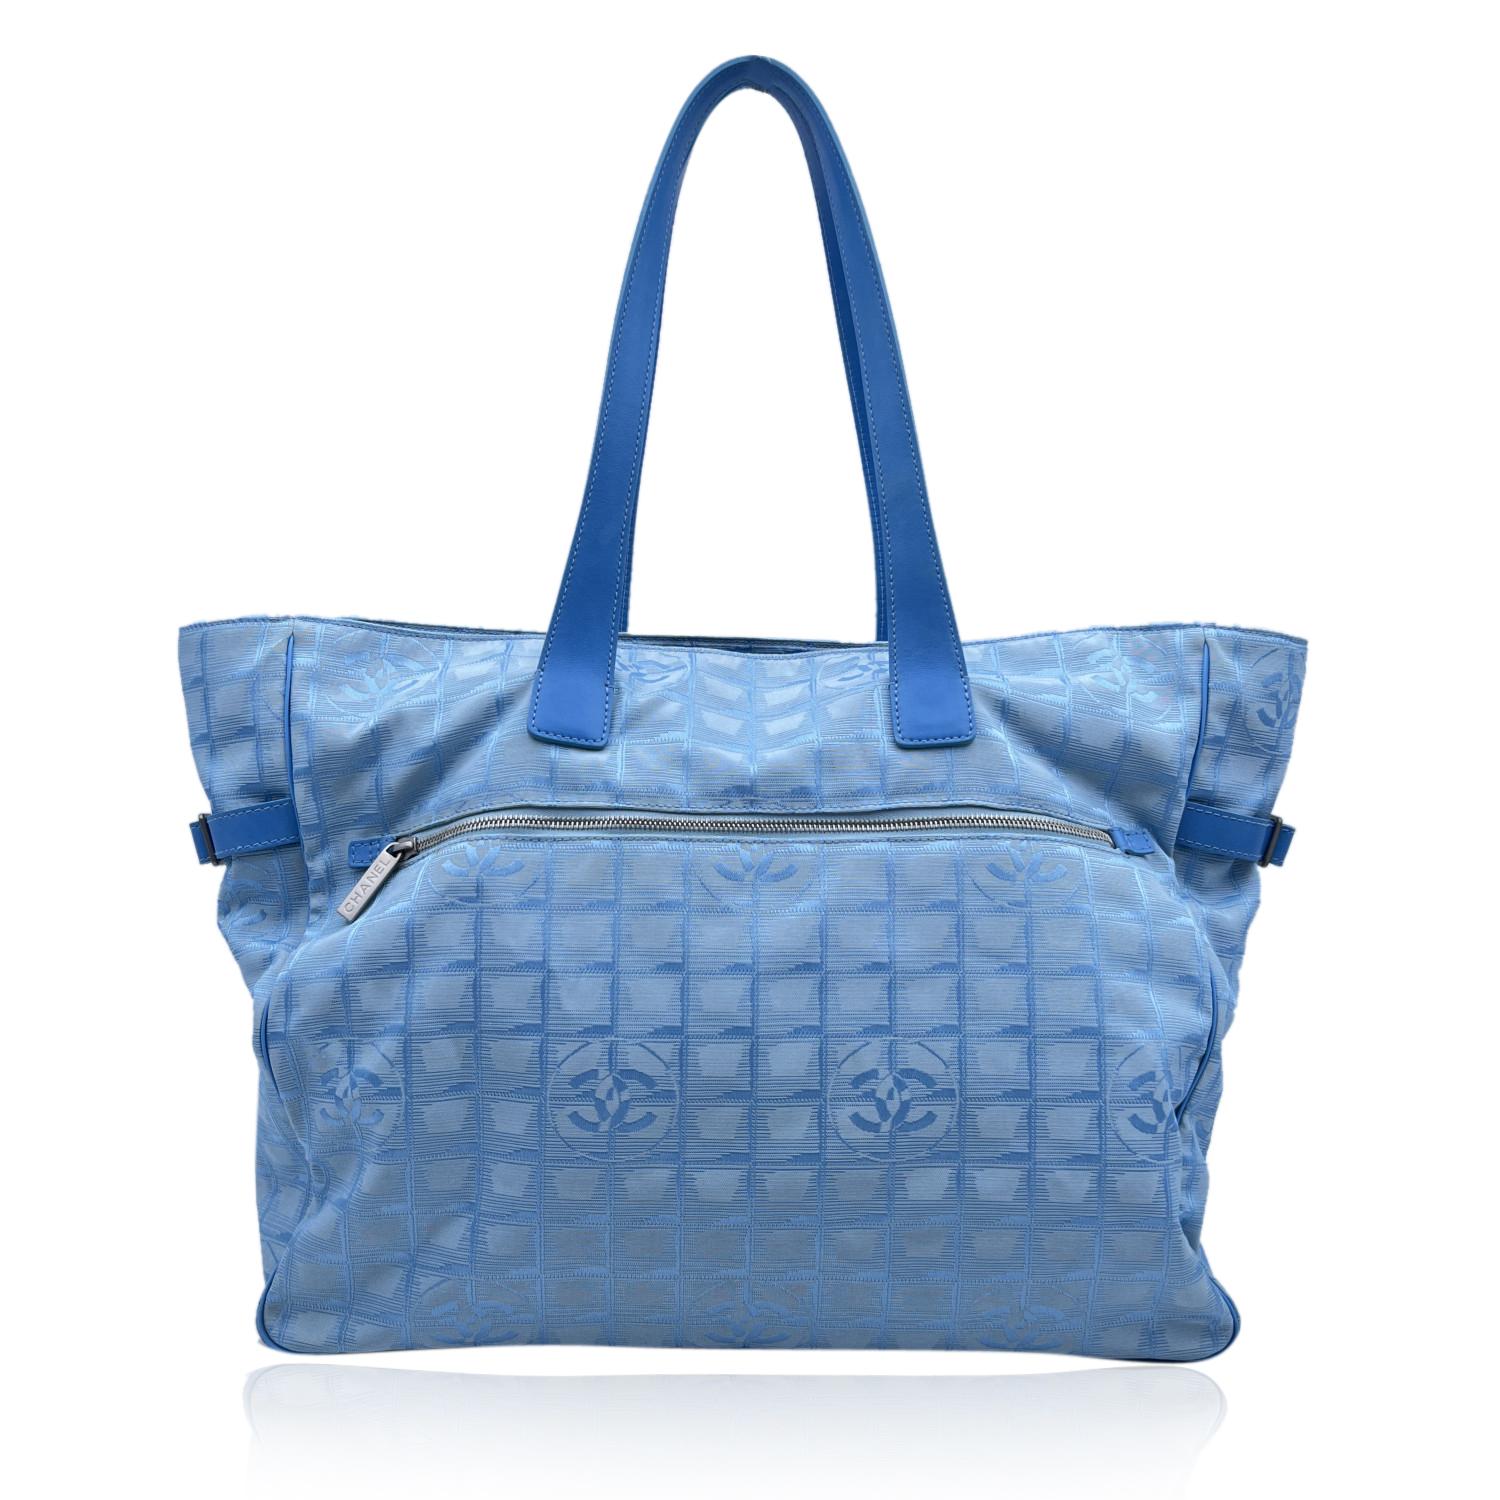 Chanel light blue jacquard nylon tote bag from the 'Travel line' collection. Light blue leather top handles. 1 rear zip pocket. Signature trim on the upper part of the bag. Nylon lining with 2 side zip pockets inside. 'Chanel - Made in France' tag ,